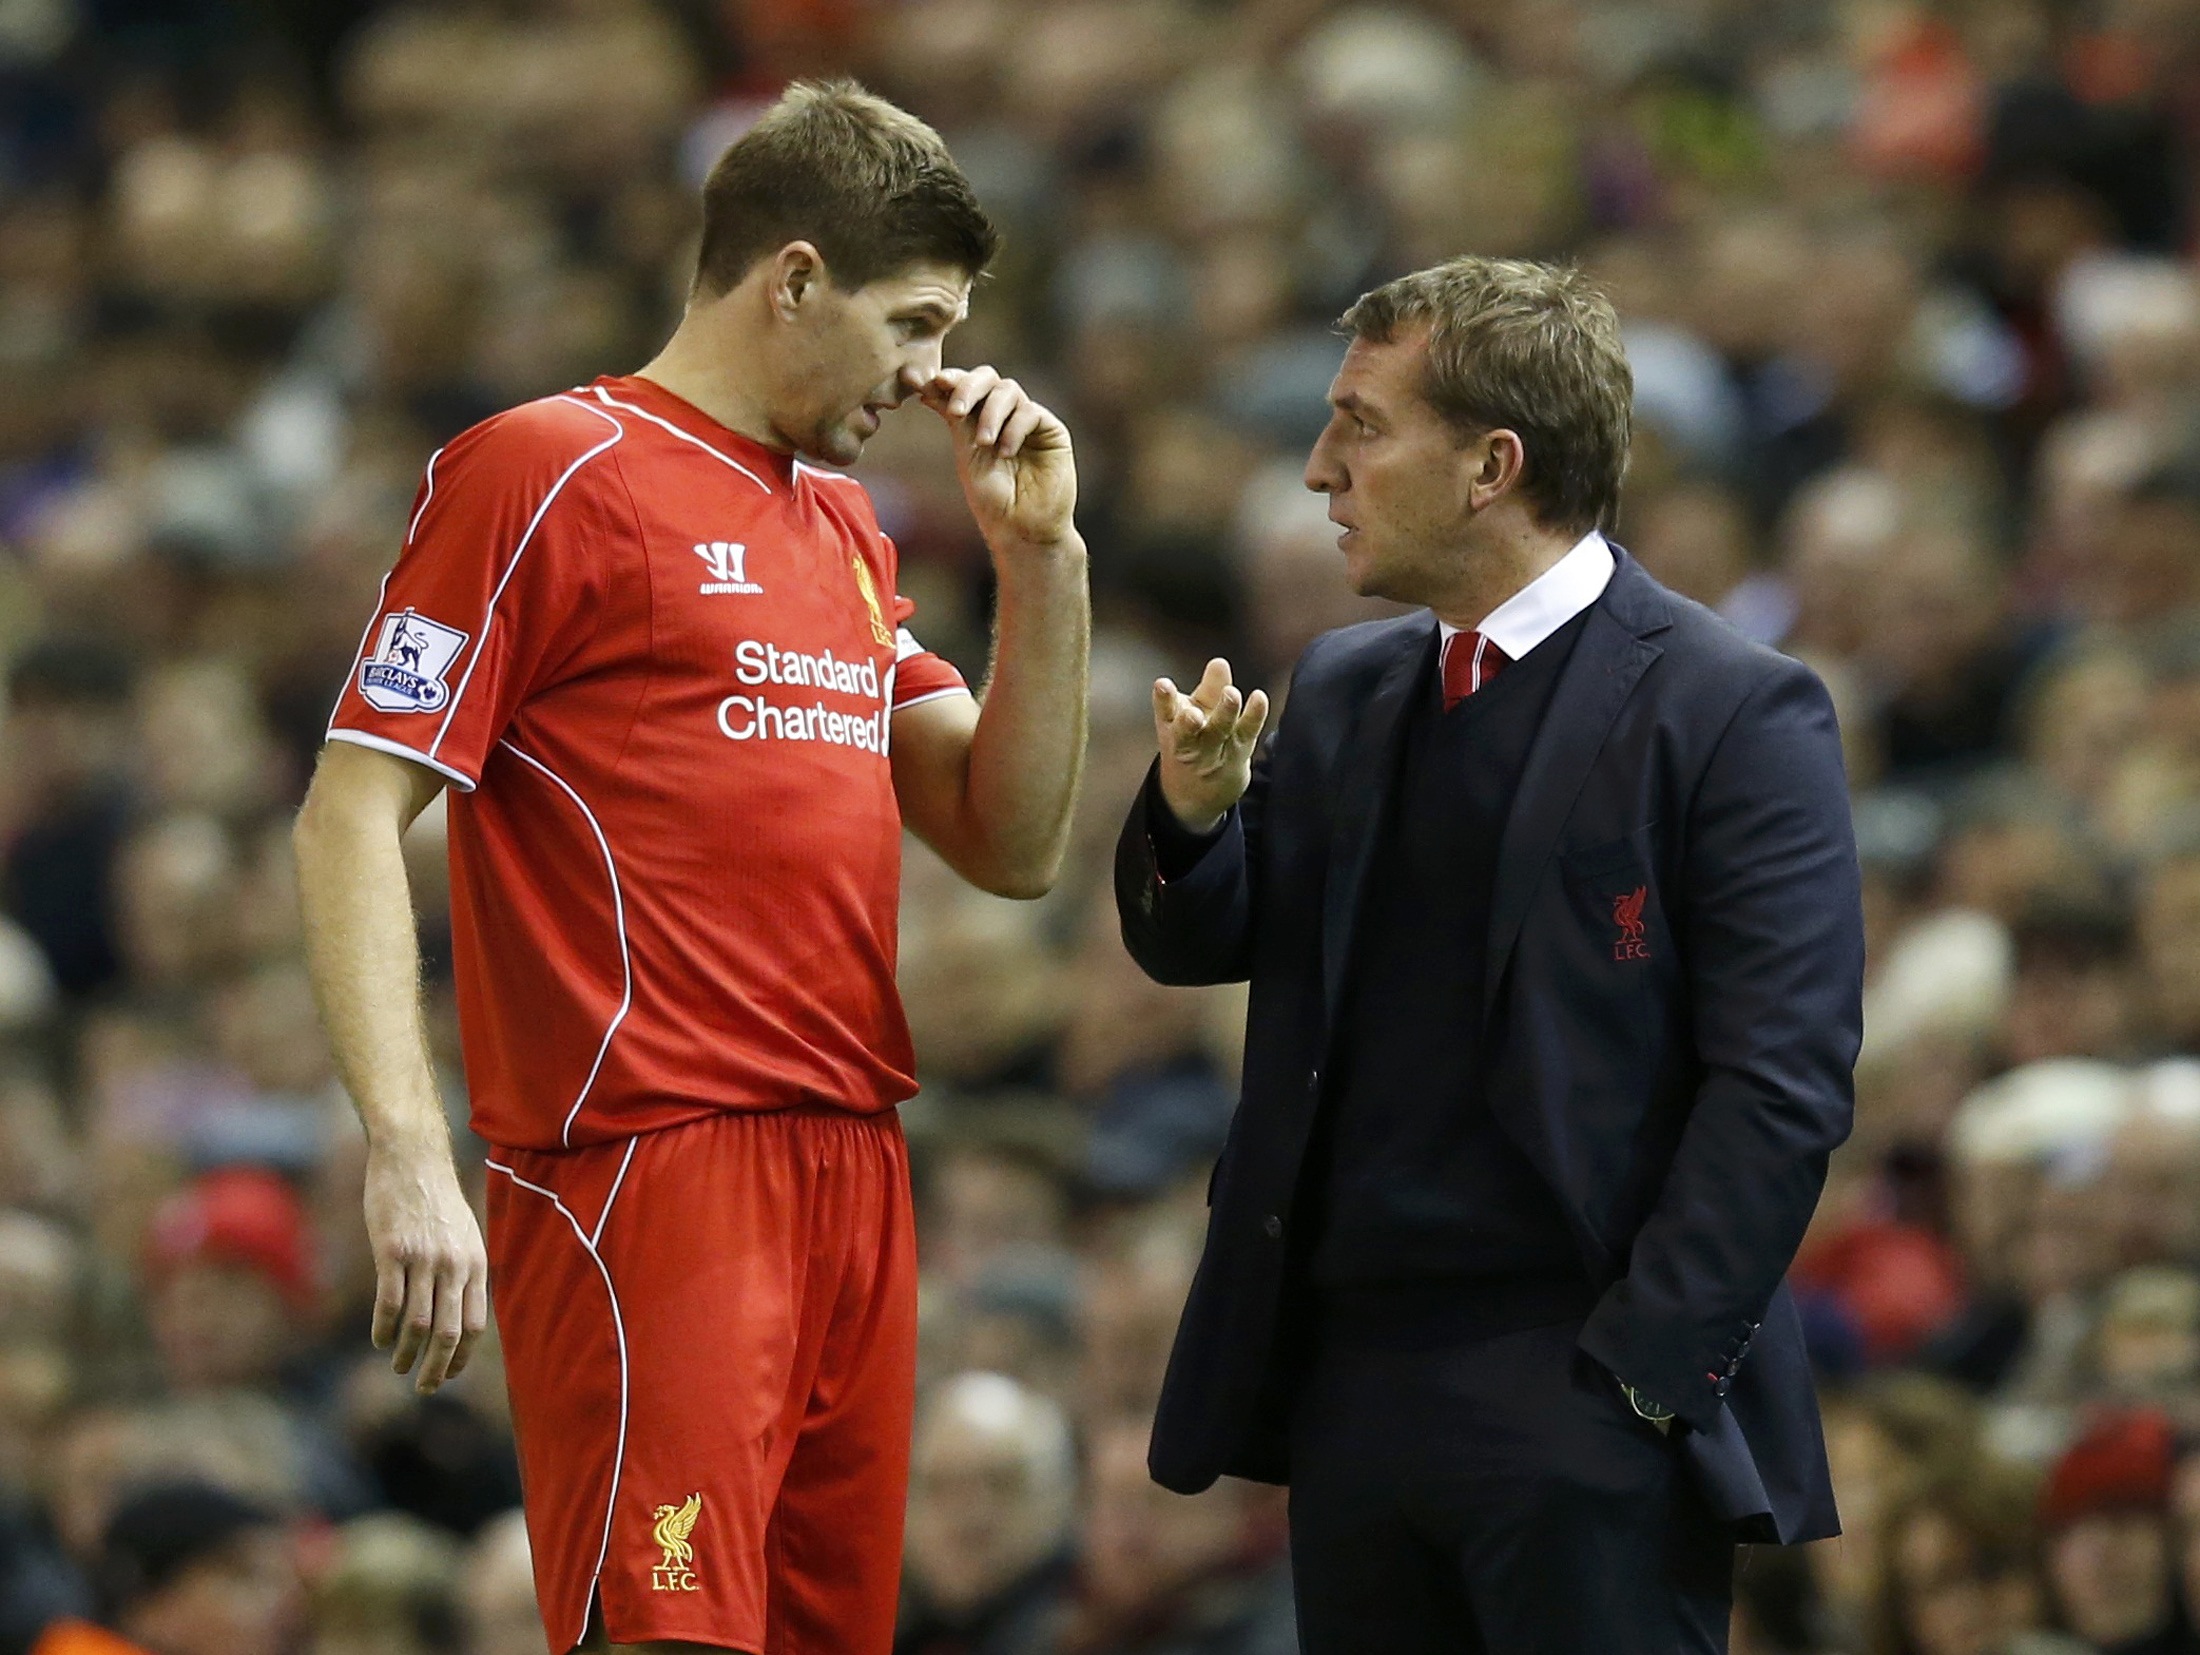 Liverpool manager Brendan Rodgers talks to Steven Gerrard during a break in their English Premier League soccer match against Arsenal at Anfield in Liverpool